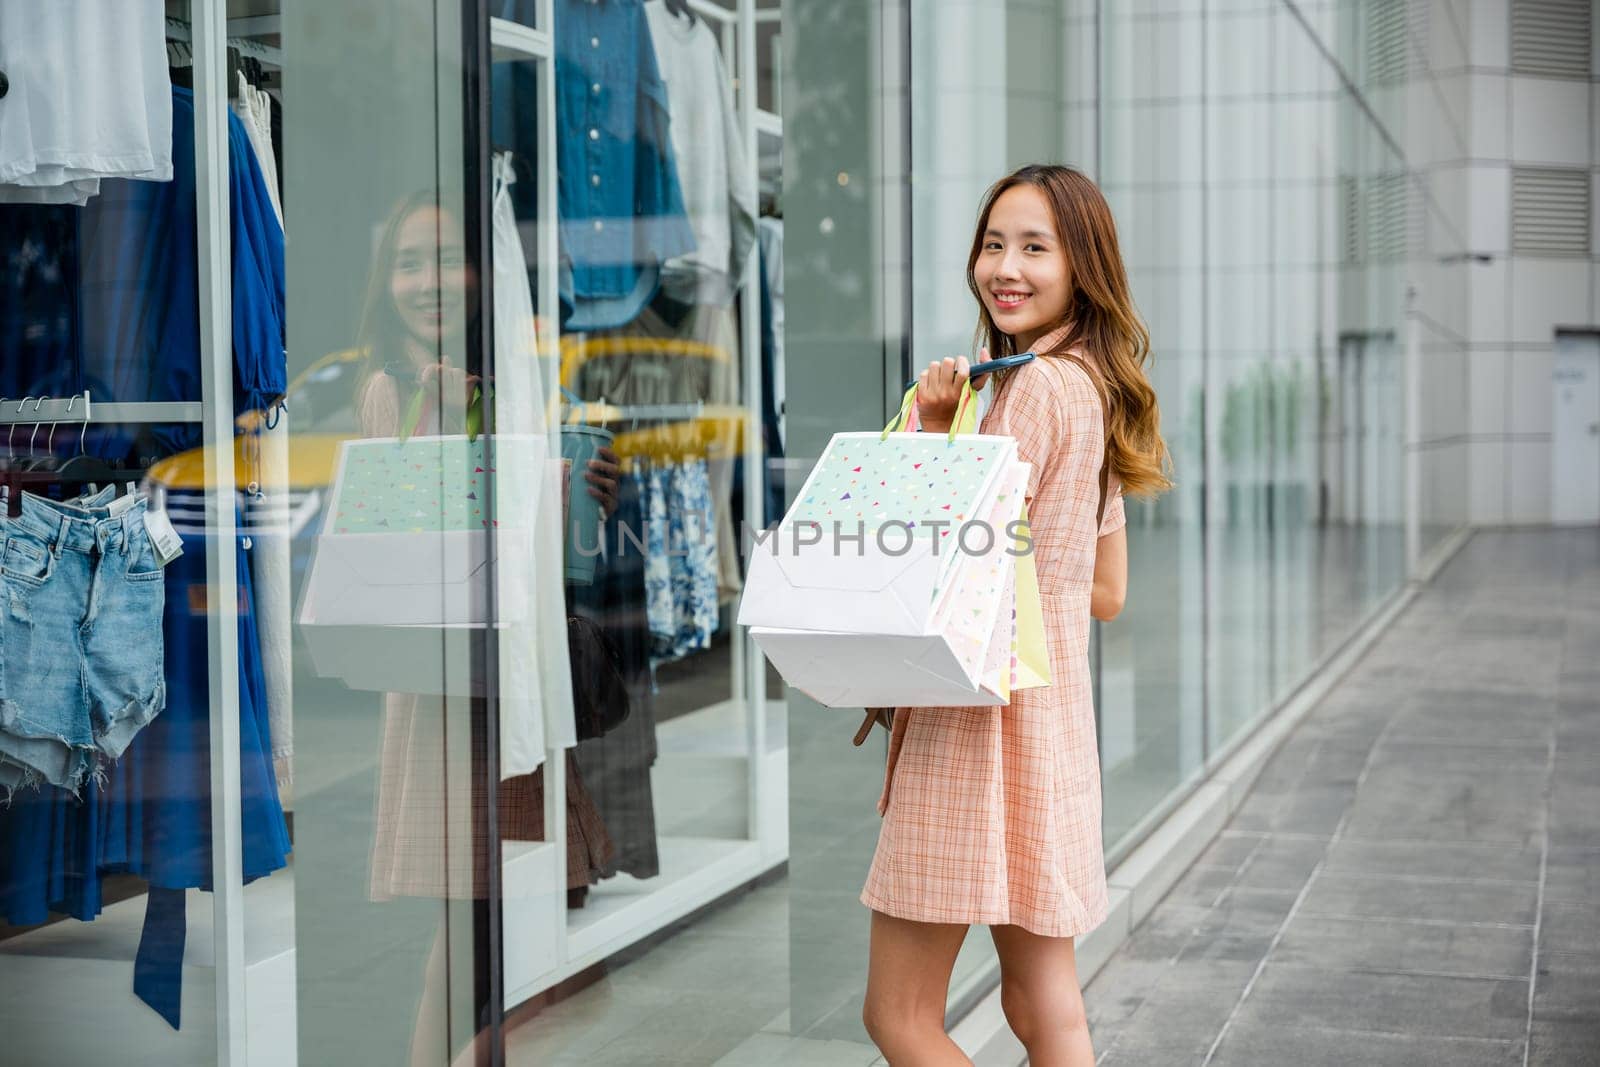 A happy customer walks back from the clothing store, carrying bags full of trendy outfits and accessories. The urban lifestyle is all about shopping